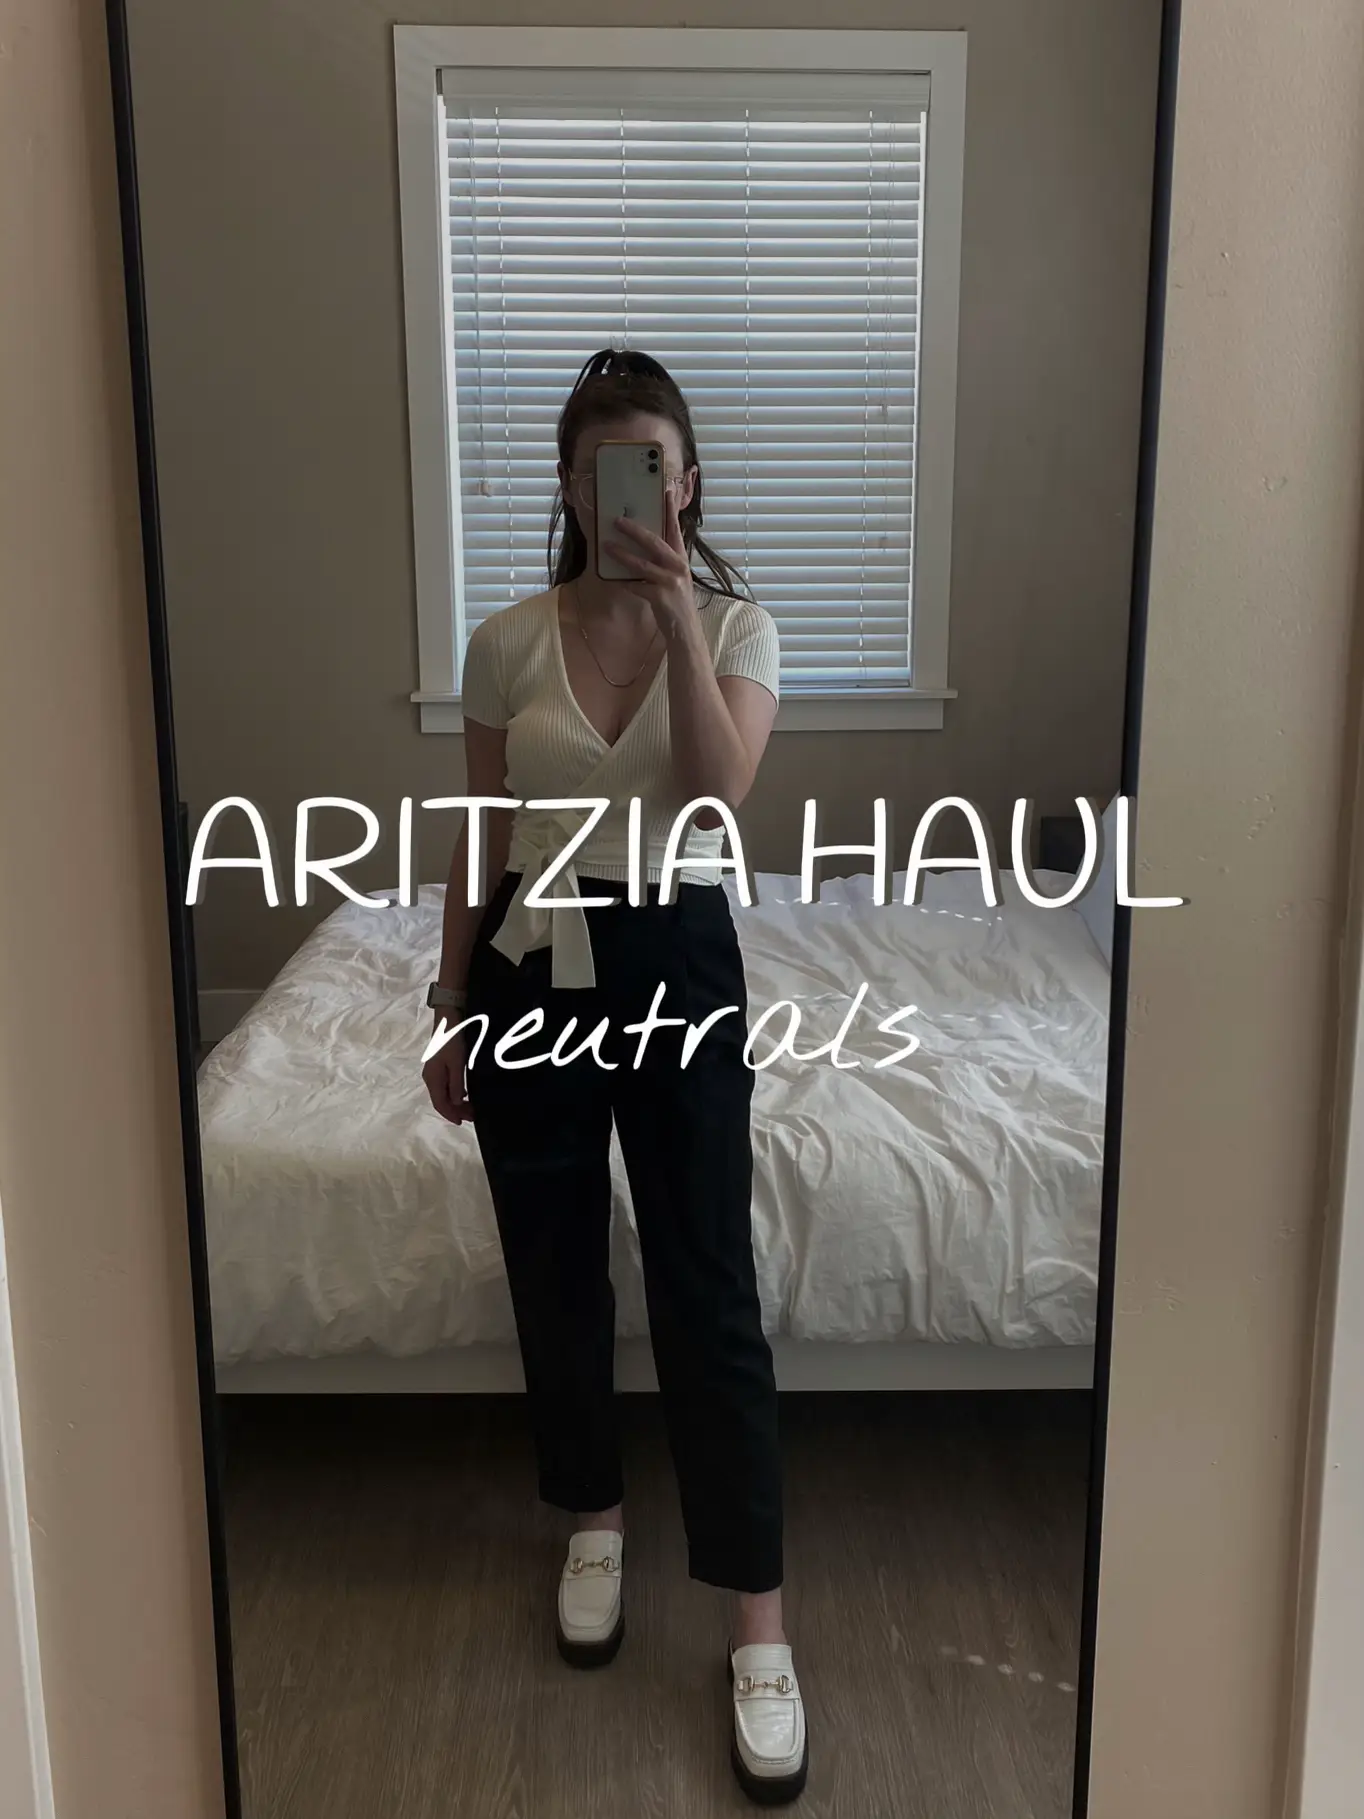 haul coming soon!! also why does aritzia not have mirrors inside